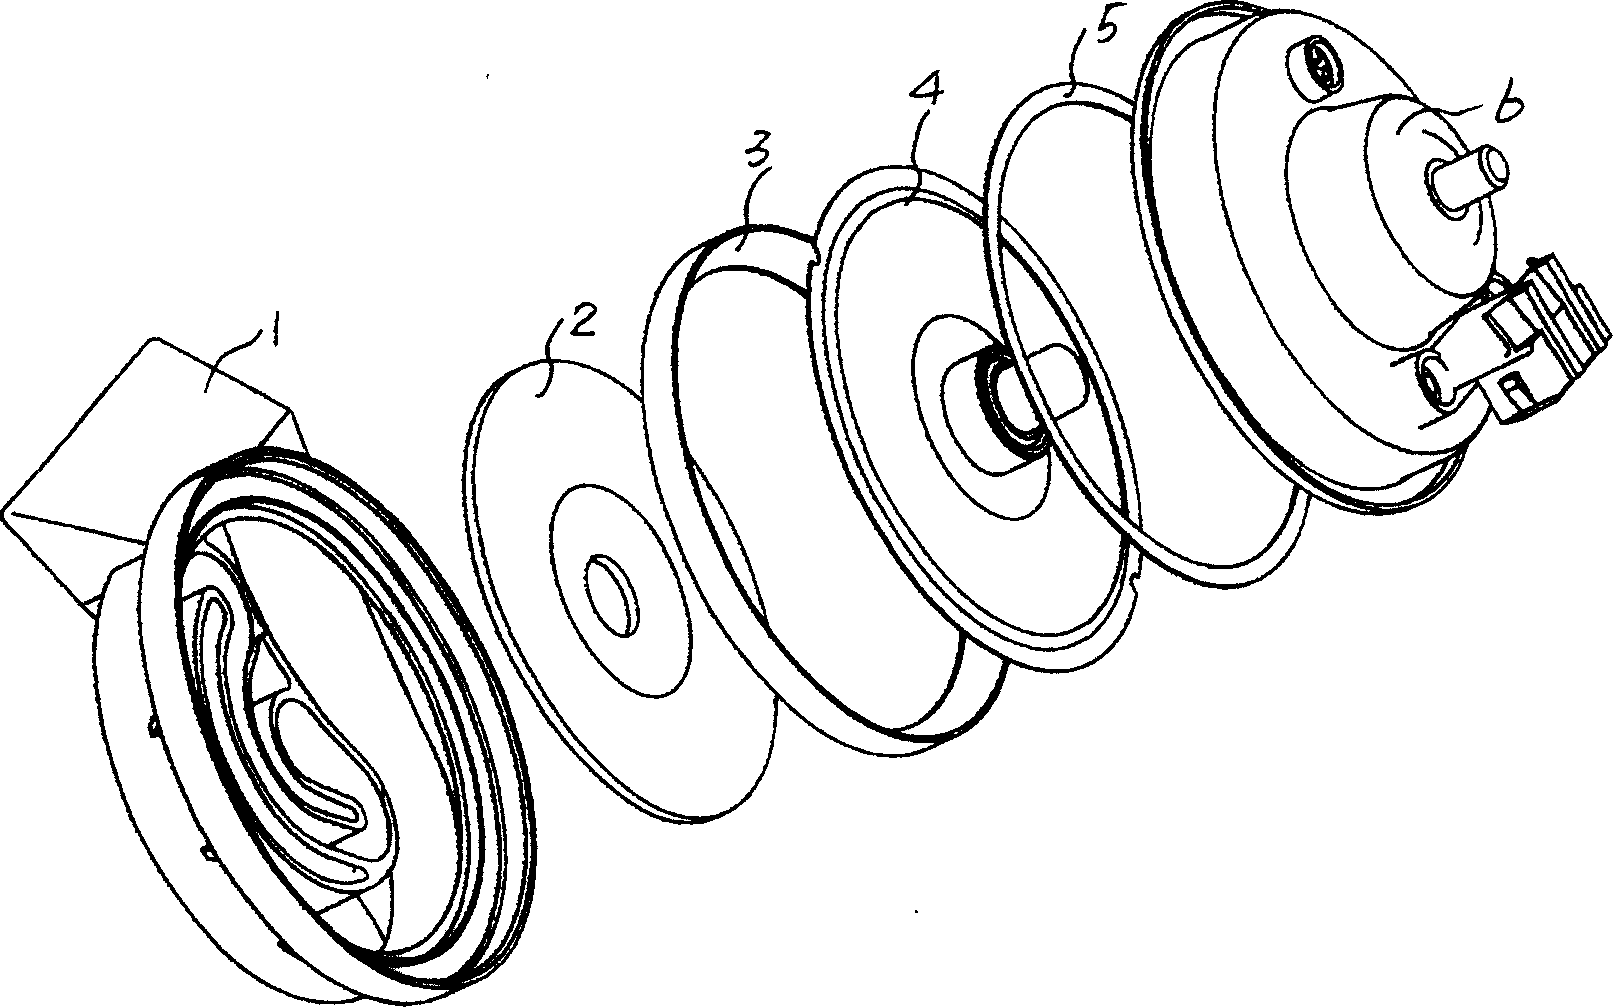 A method of manufacturing a spiral electric horn